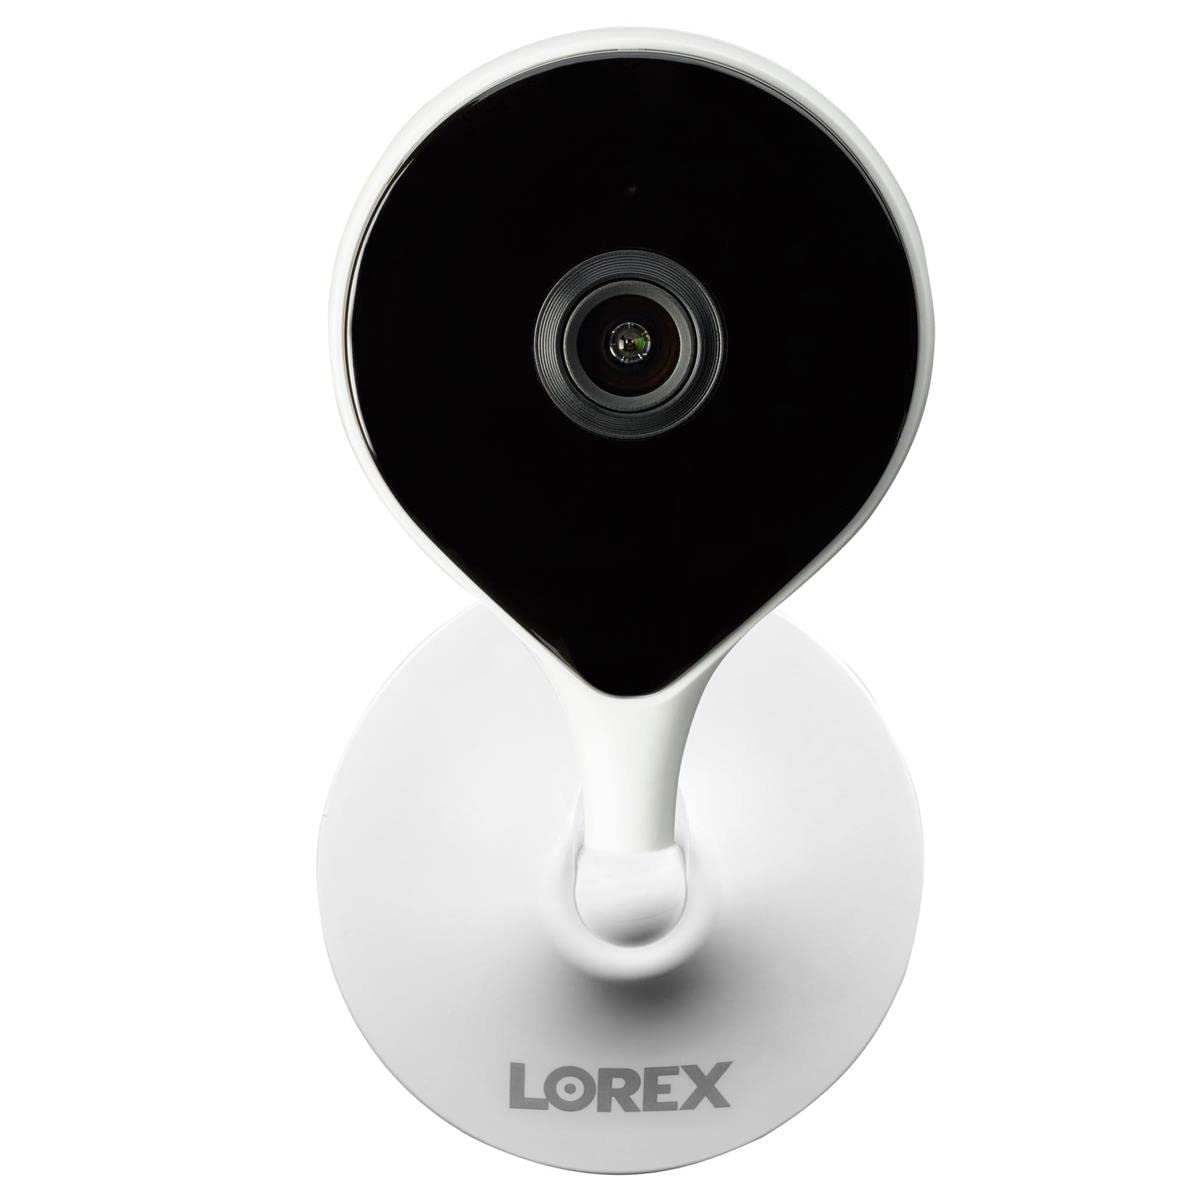 Lorex 2K Indoor WiFi Security Camera, Add-On Security Camera for Wired Surveillance System (1080p)